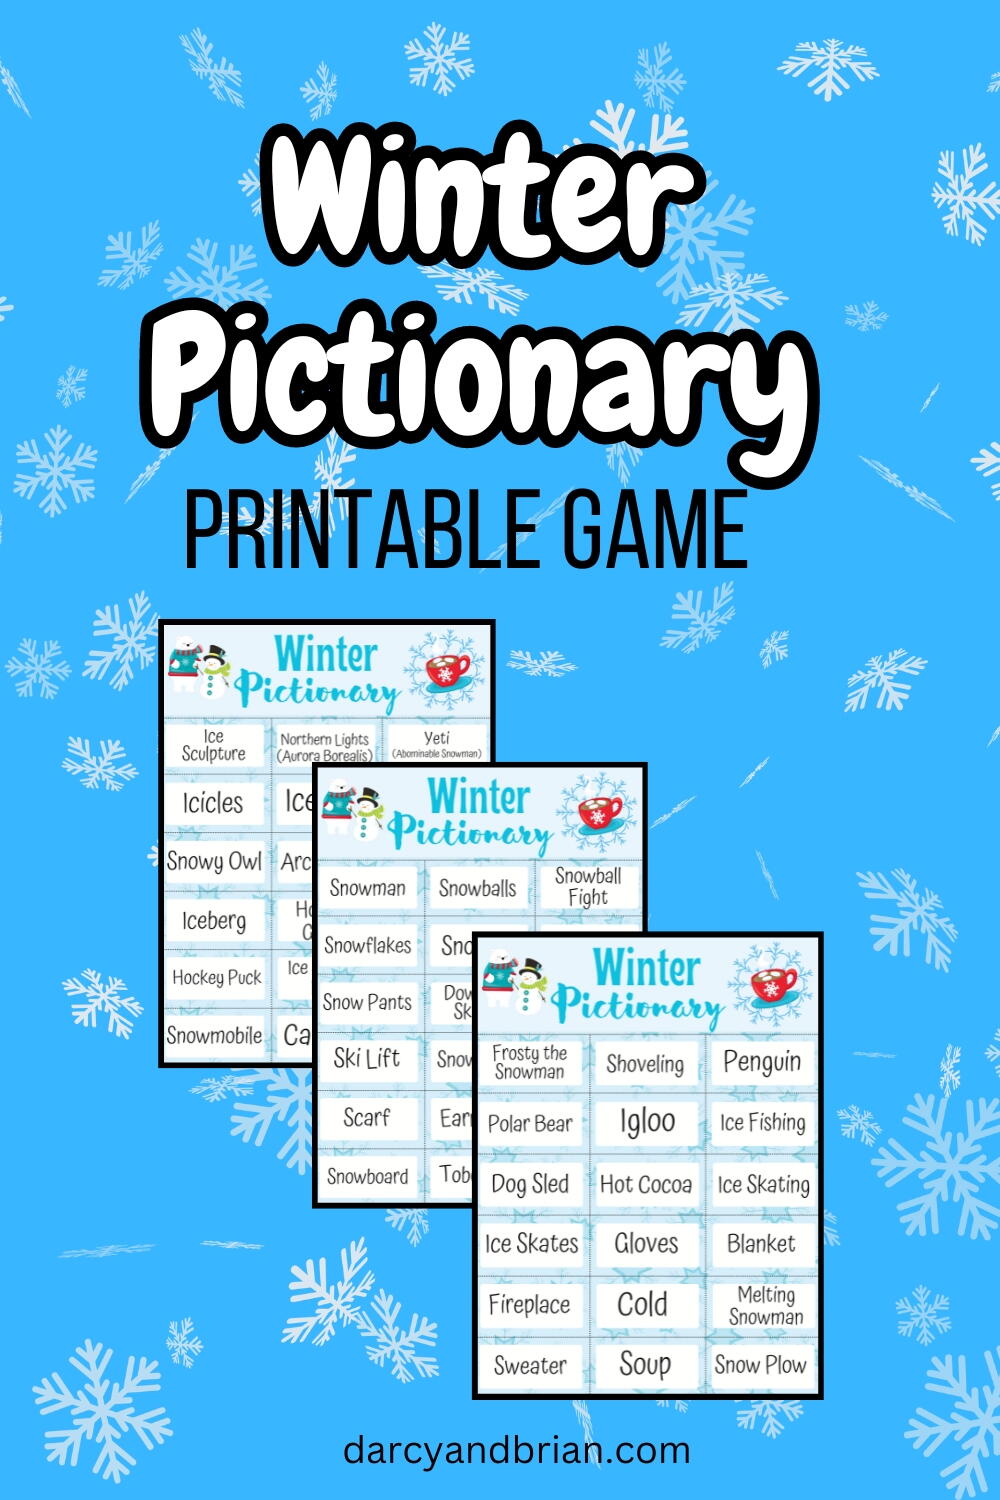 Summer Pictionary Words for Kids - Free Printable Game